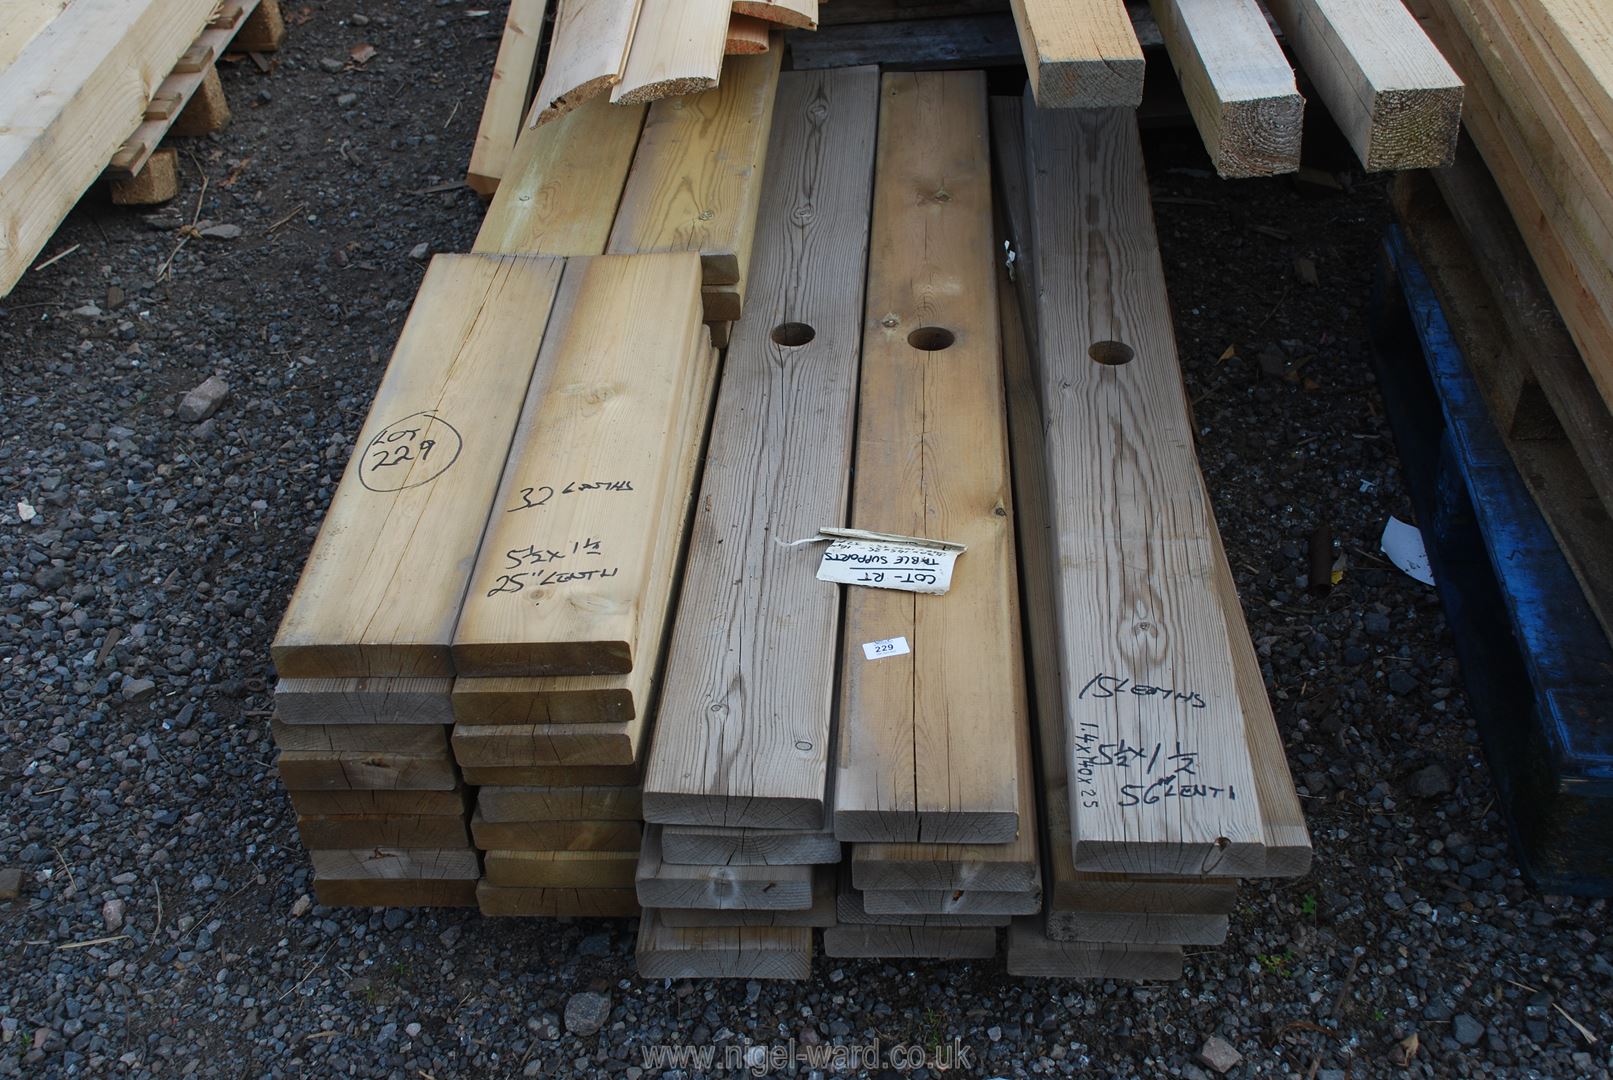 15 lengths of picnic table timber 1 1/2'' x 5 1/2'' x 56'' long and 32 lengths of seat 25'' x 5